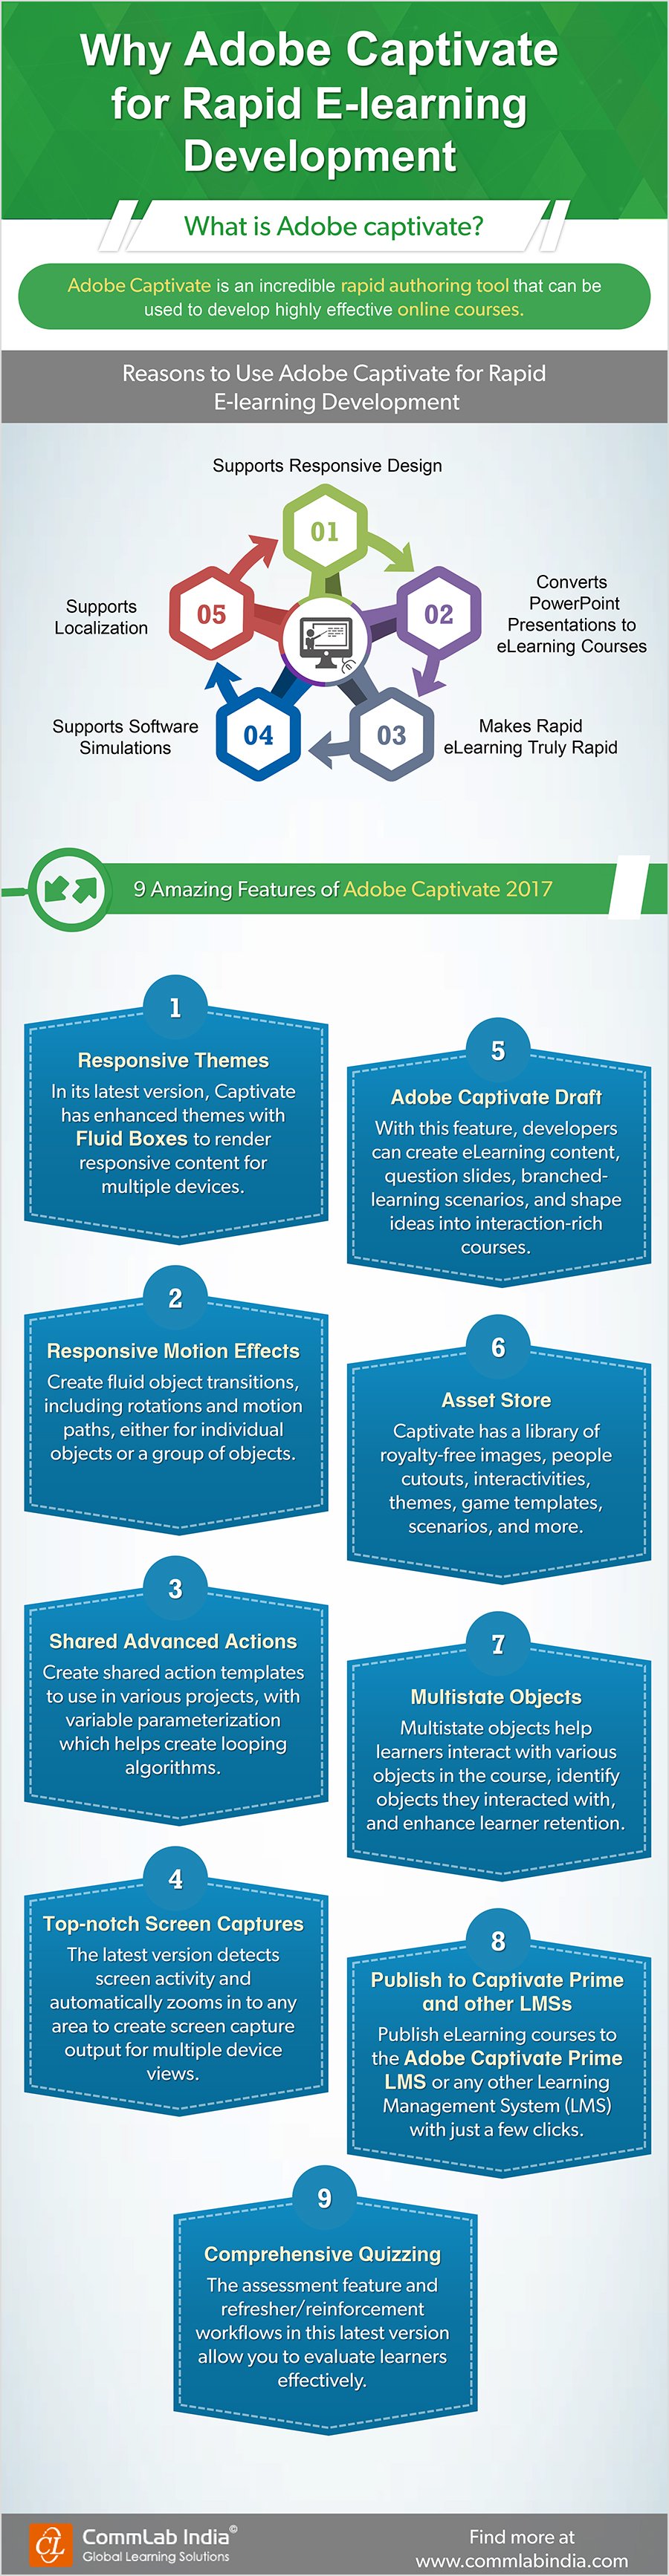 Why Adobe captivate for Rapid E-learning Development [Infographic]